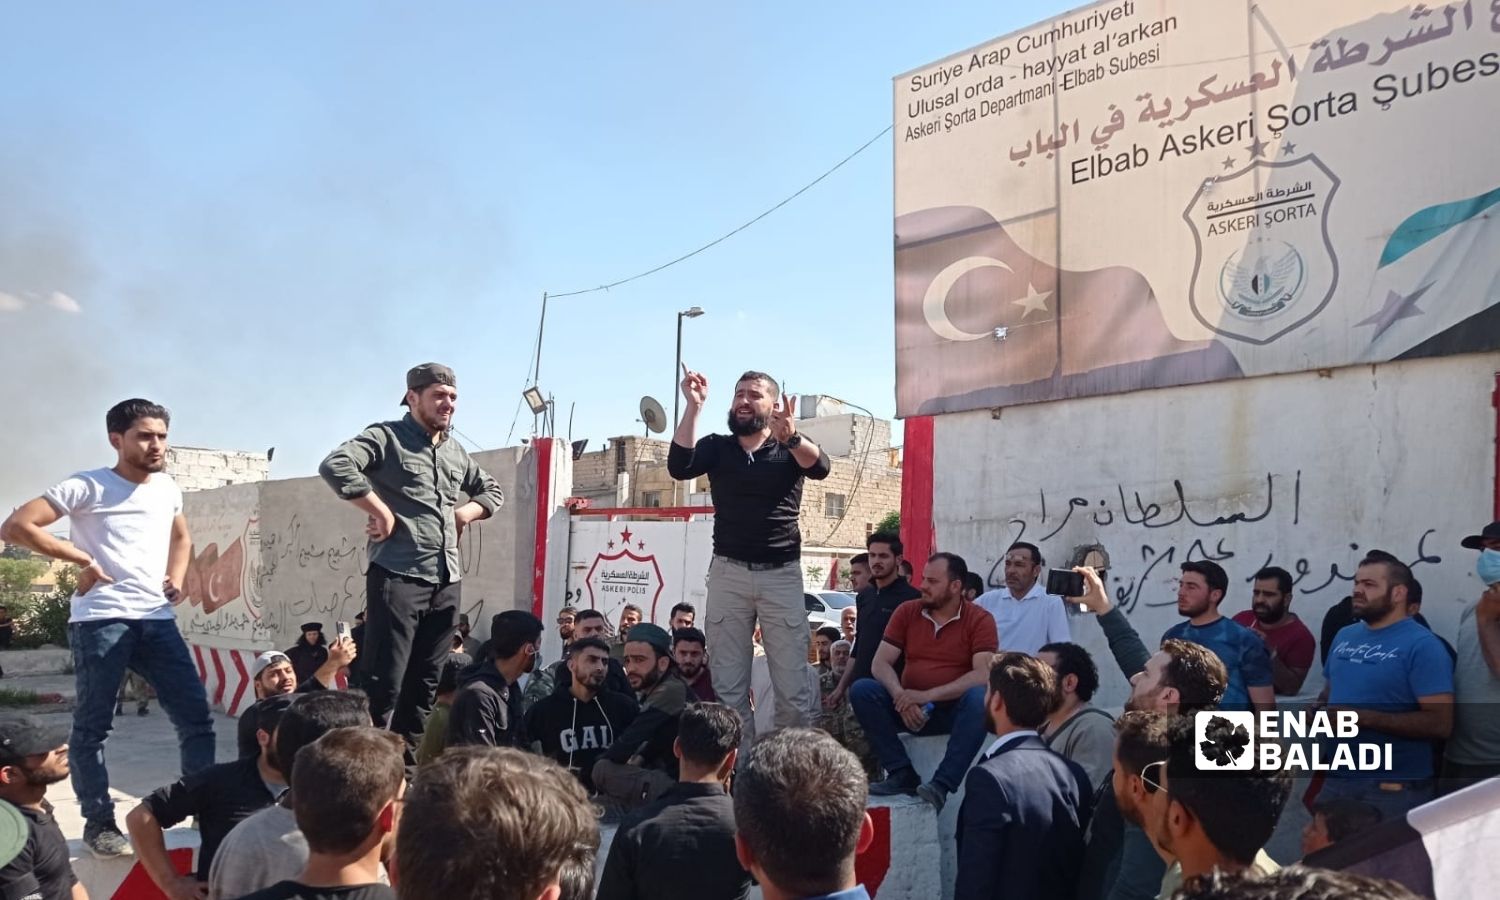 A sit-in in the city of al-Bab in the eastern countryside of Aleppo, in response to the release of a former Syrian regime fighter who involved in war violations - 18 May 2022 (Enab Baladi/Siraj Mohammad)